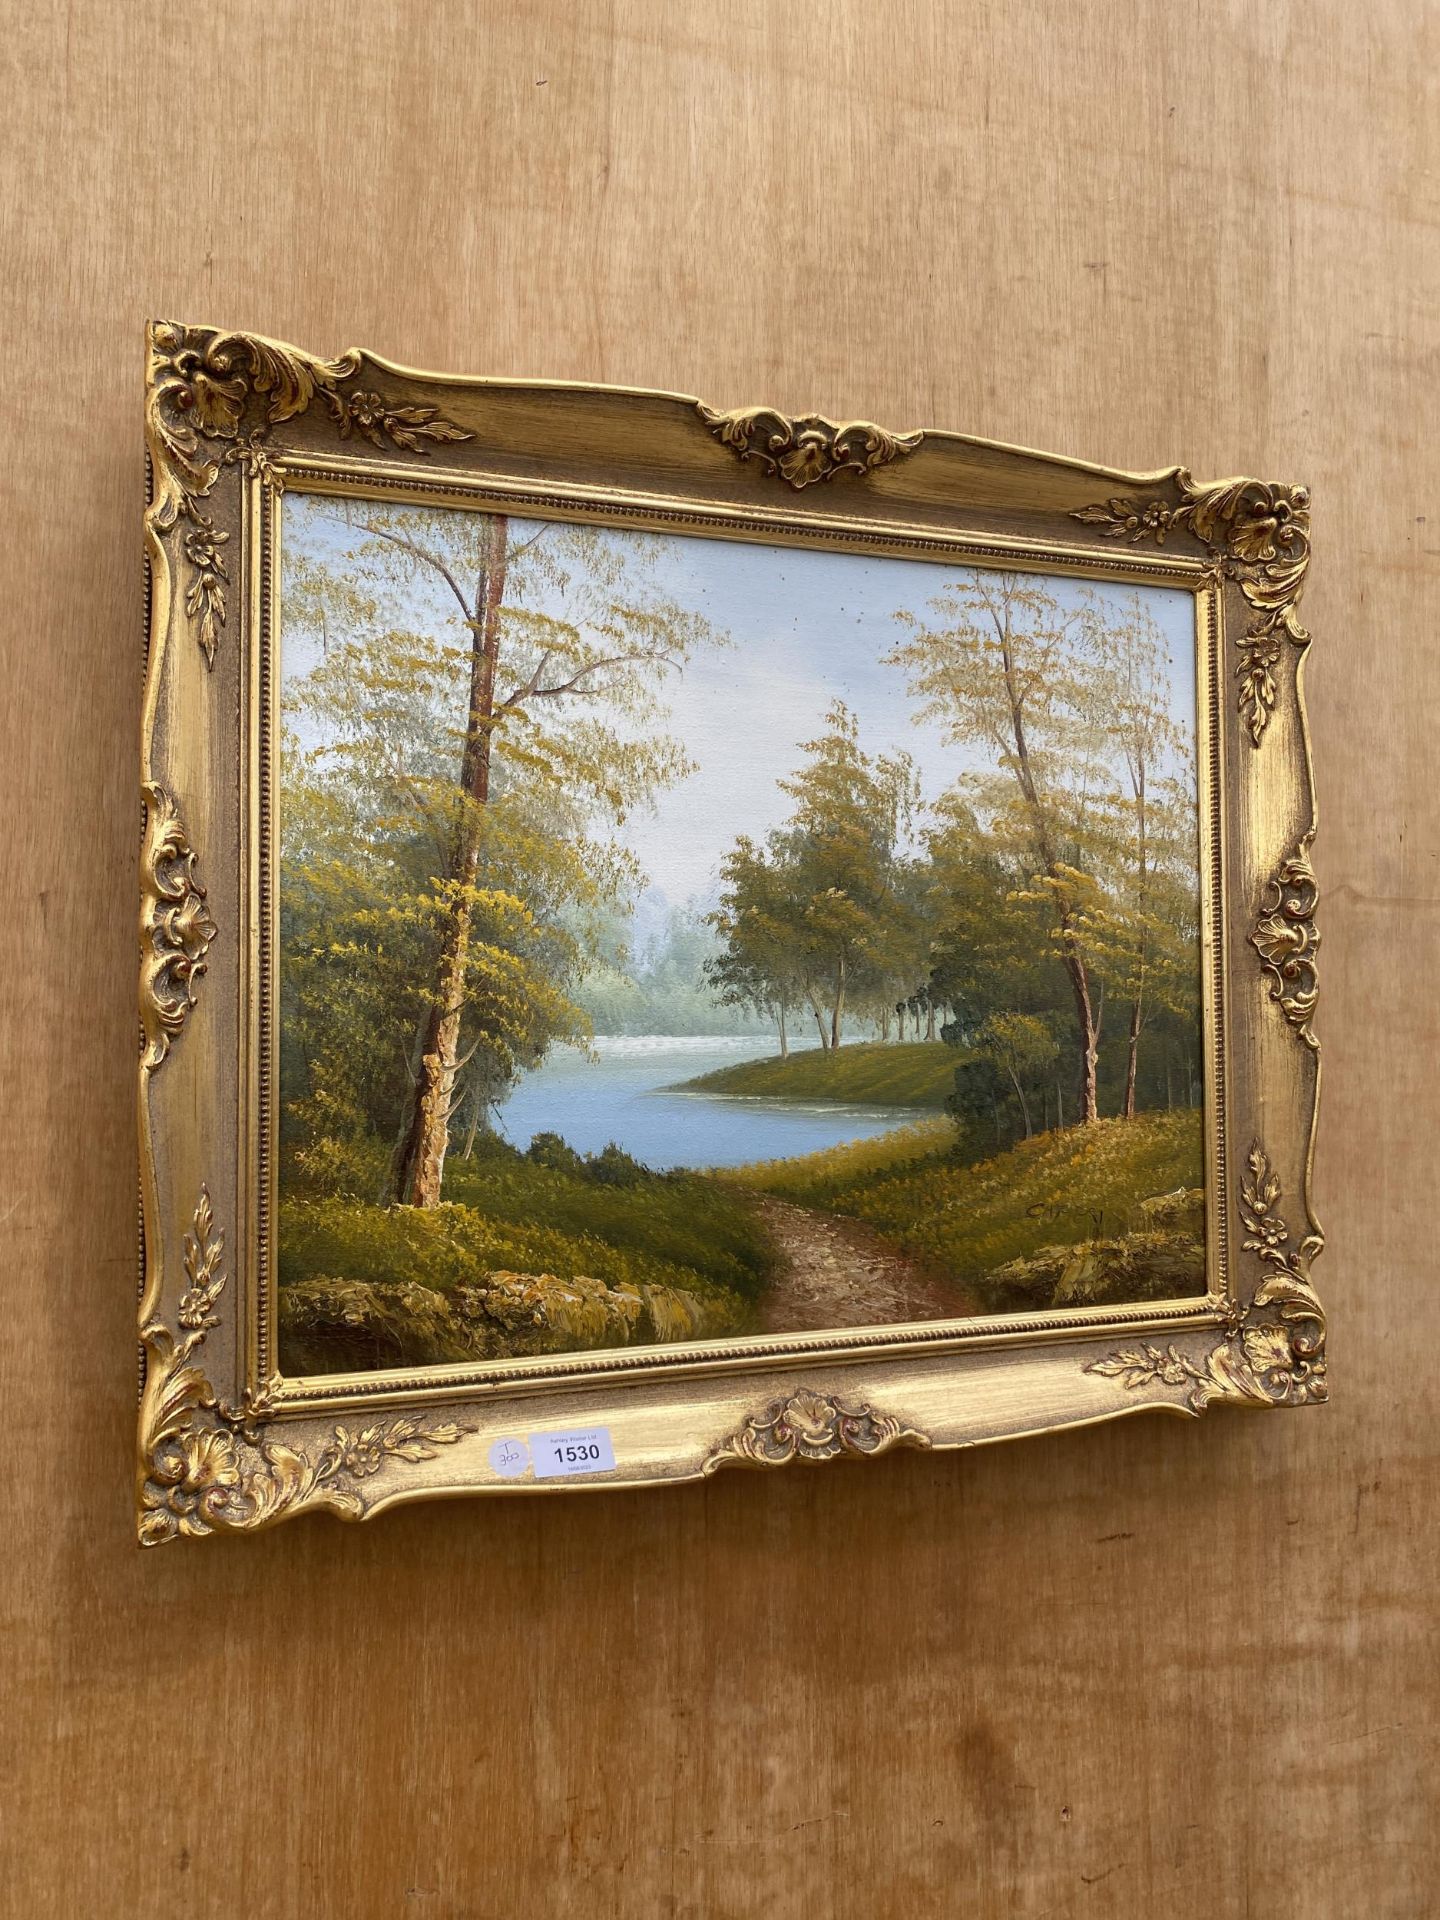 A GILT FRAMED OIL ON CANVAS OF A FOREST SCENE, INDISTINCTLY SIGNED